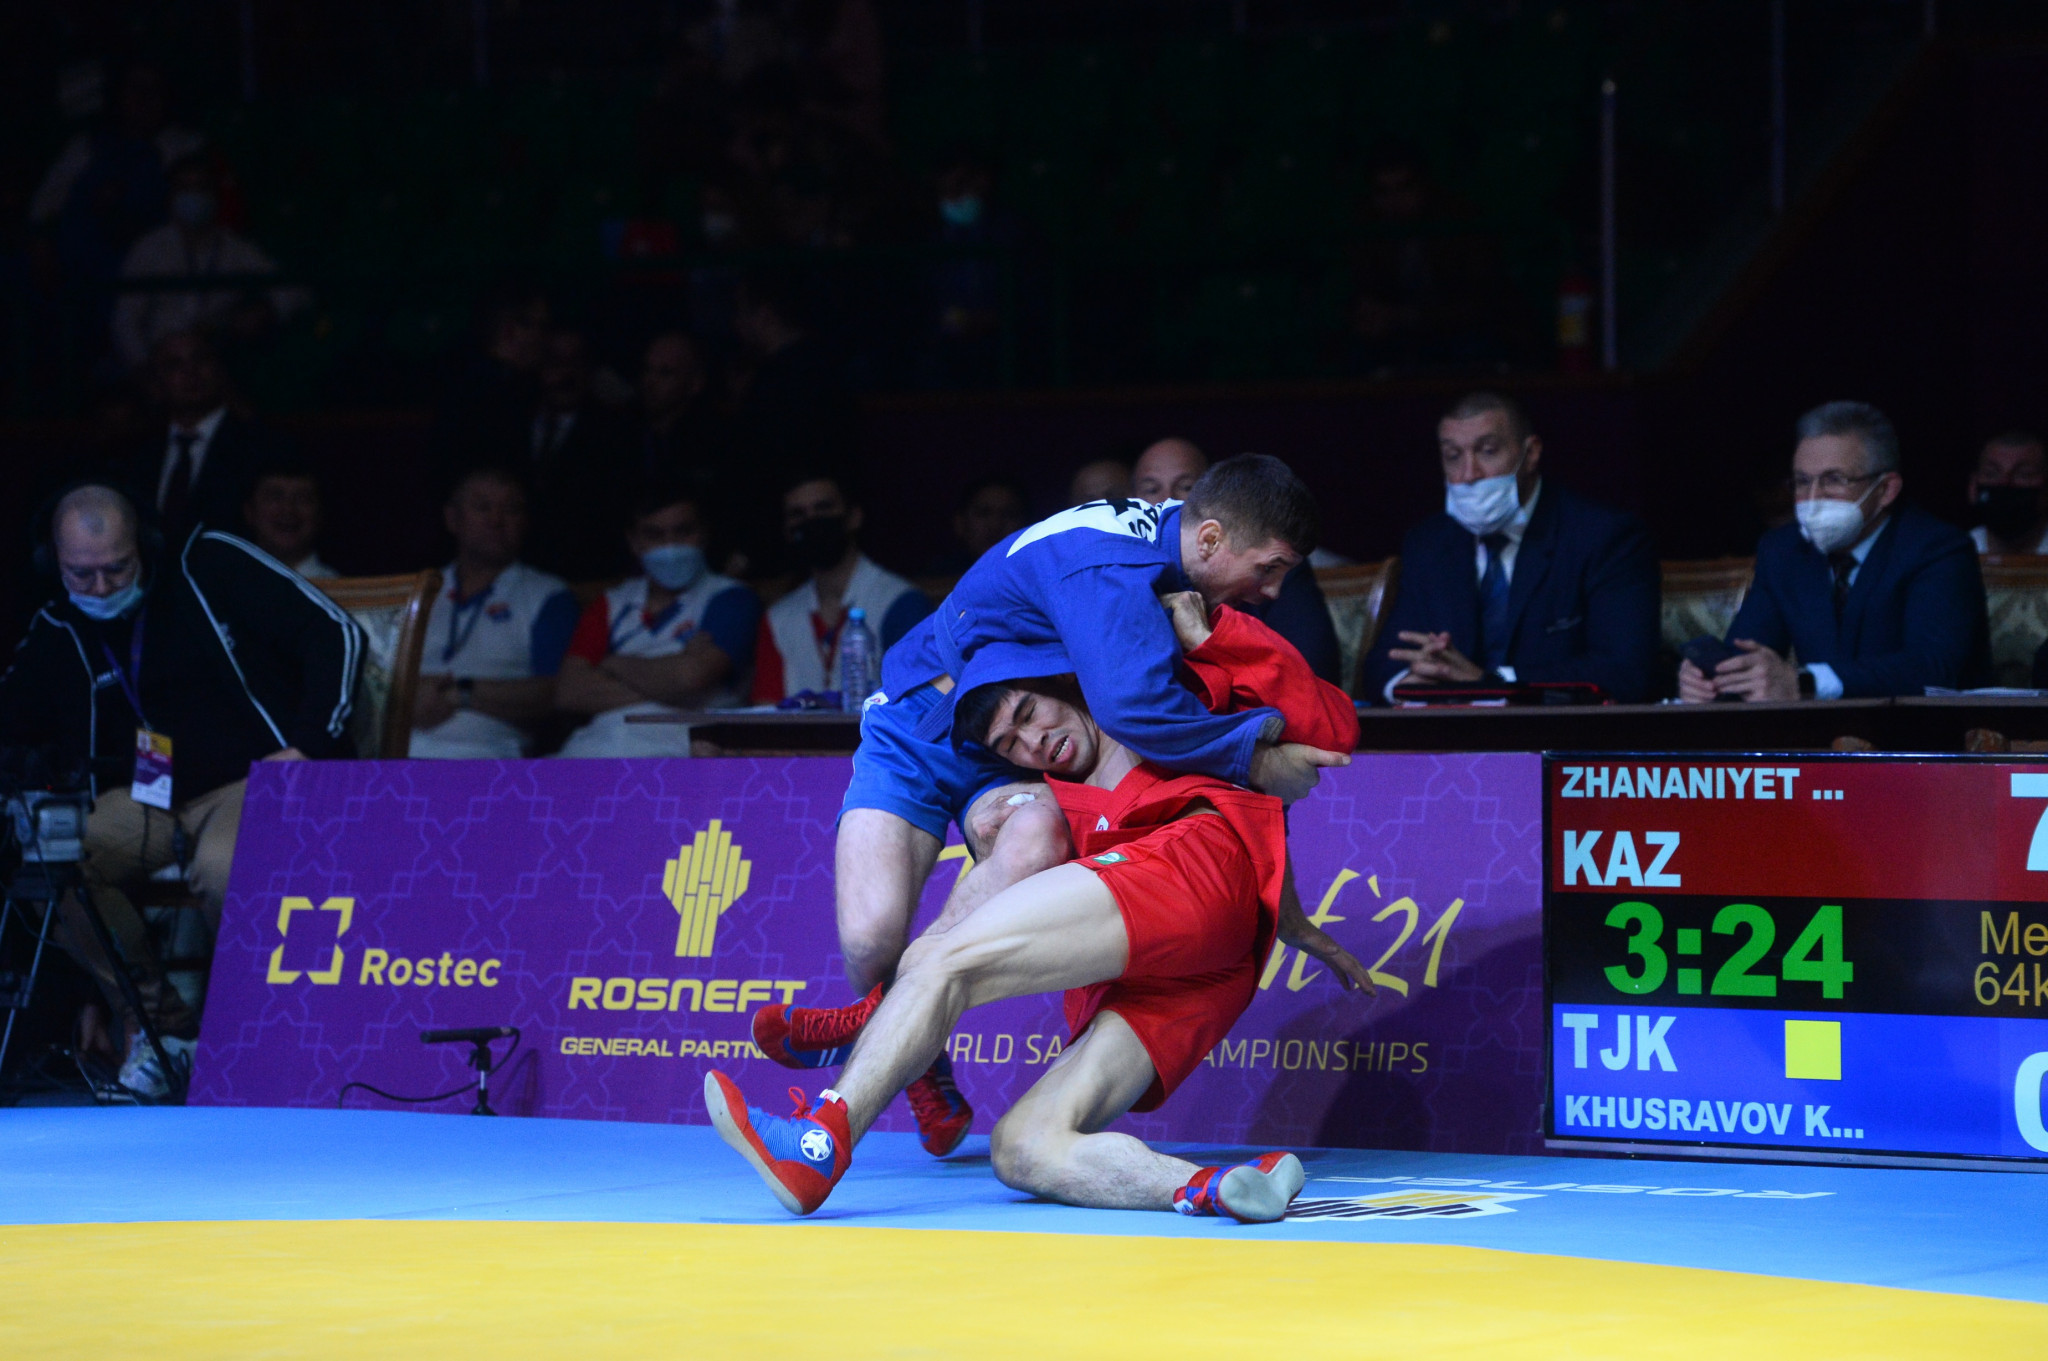 Gold medallists at next month's World Sambo Championships will get $4,000 ©FIAS